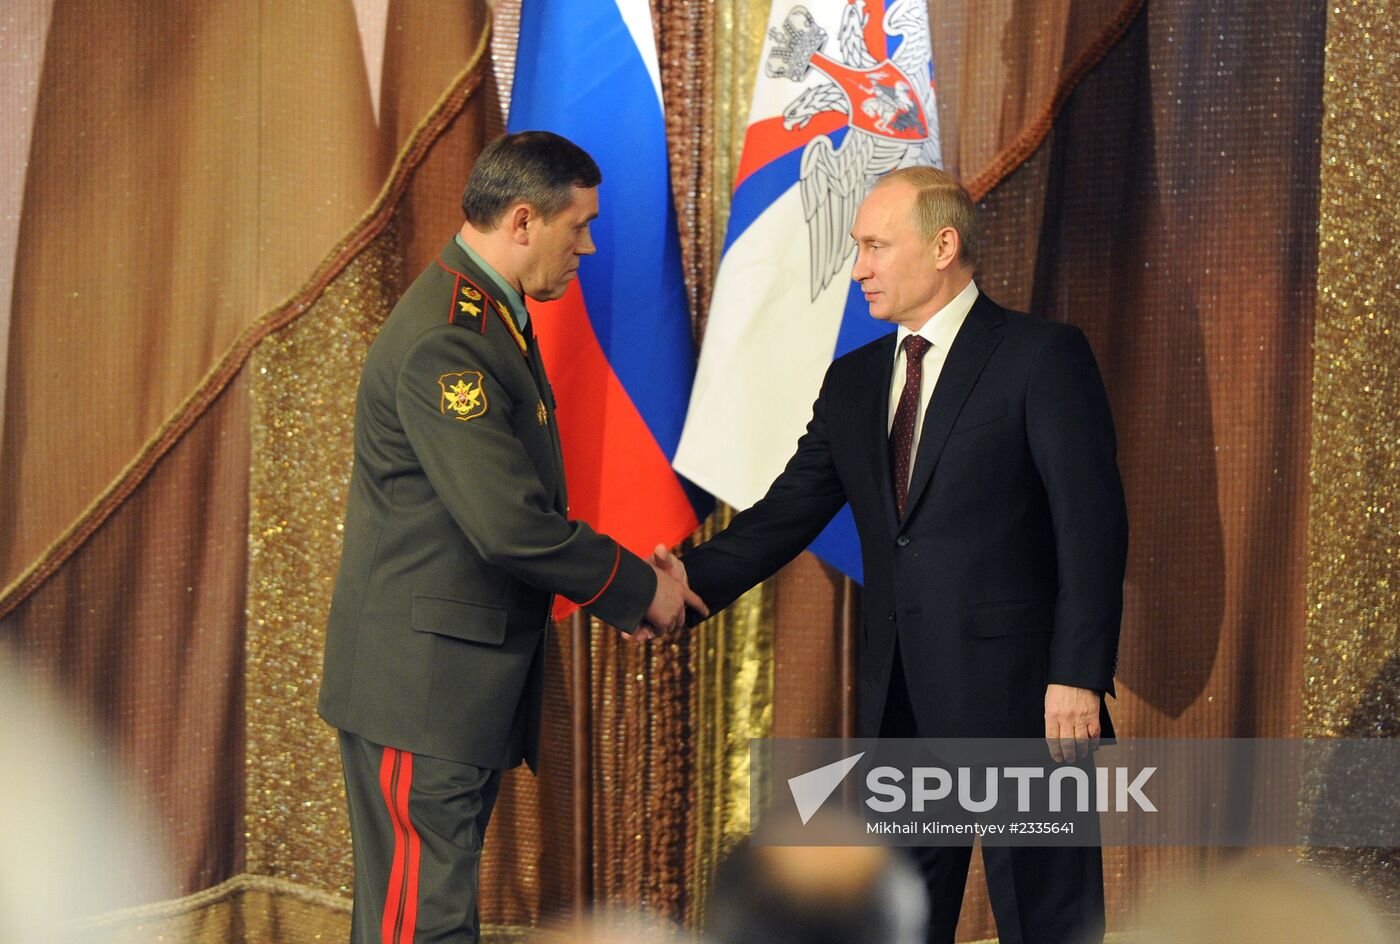 Putin attends Russian Defense Ministry's Board meeting in expanded format